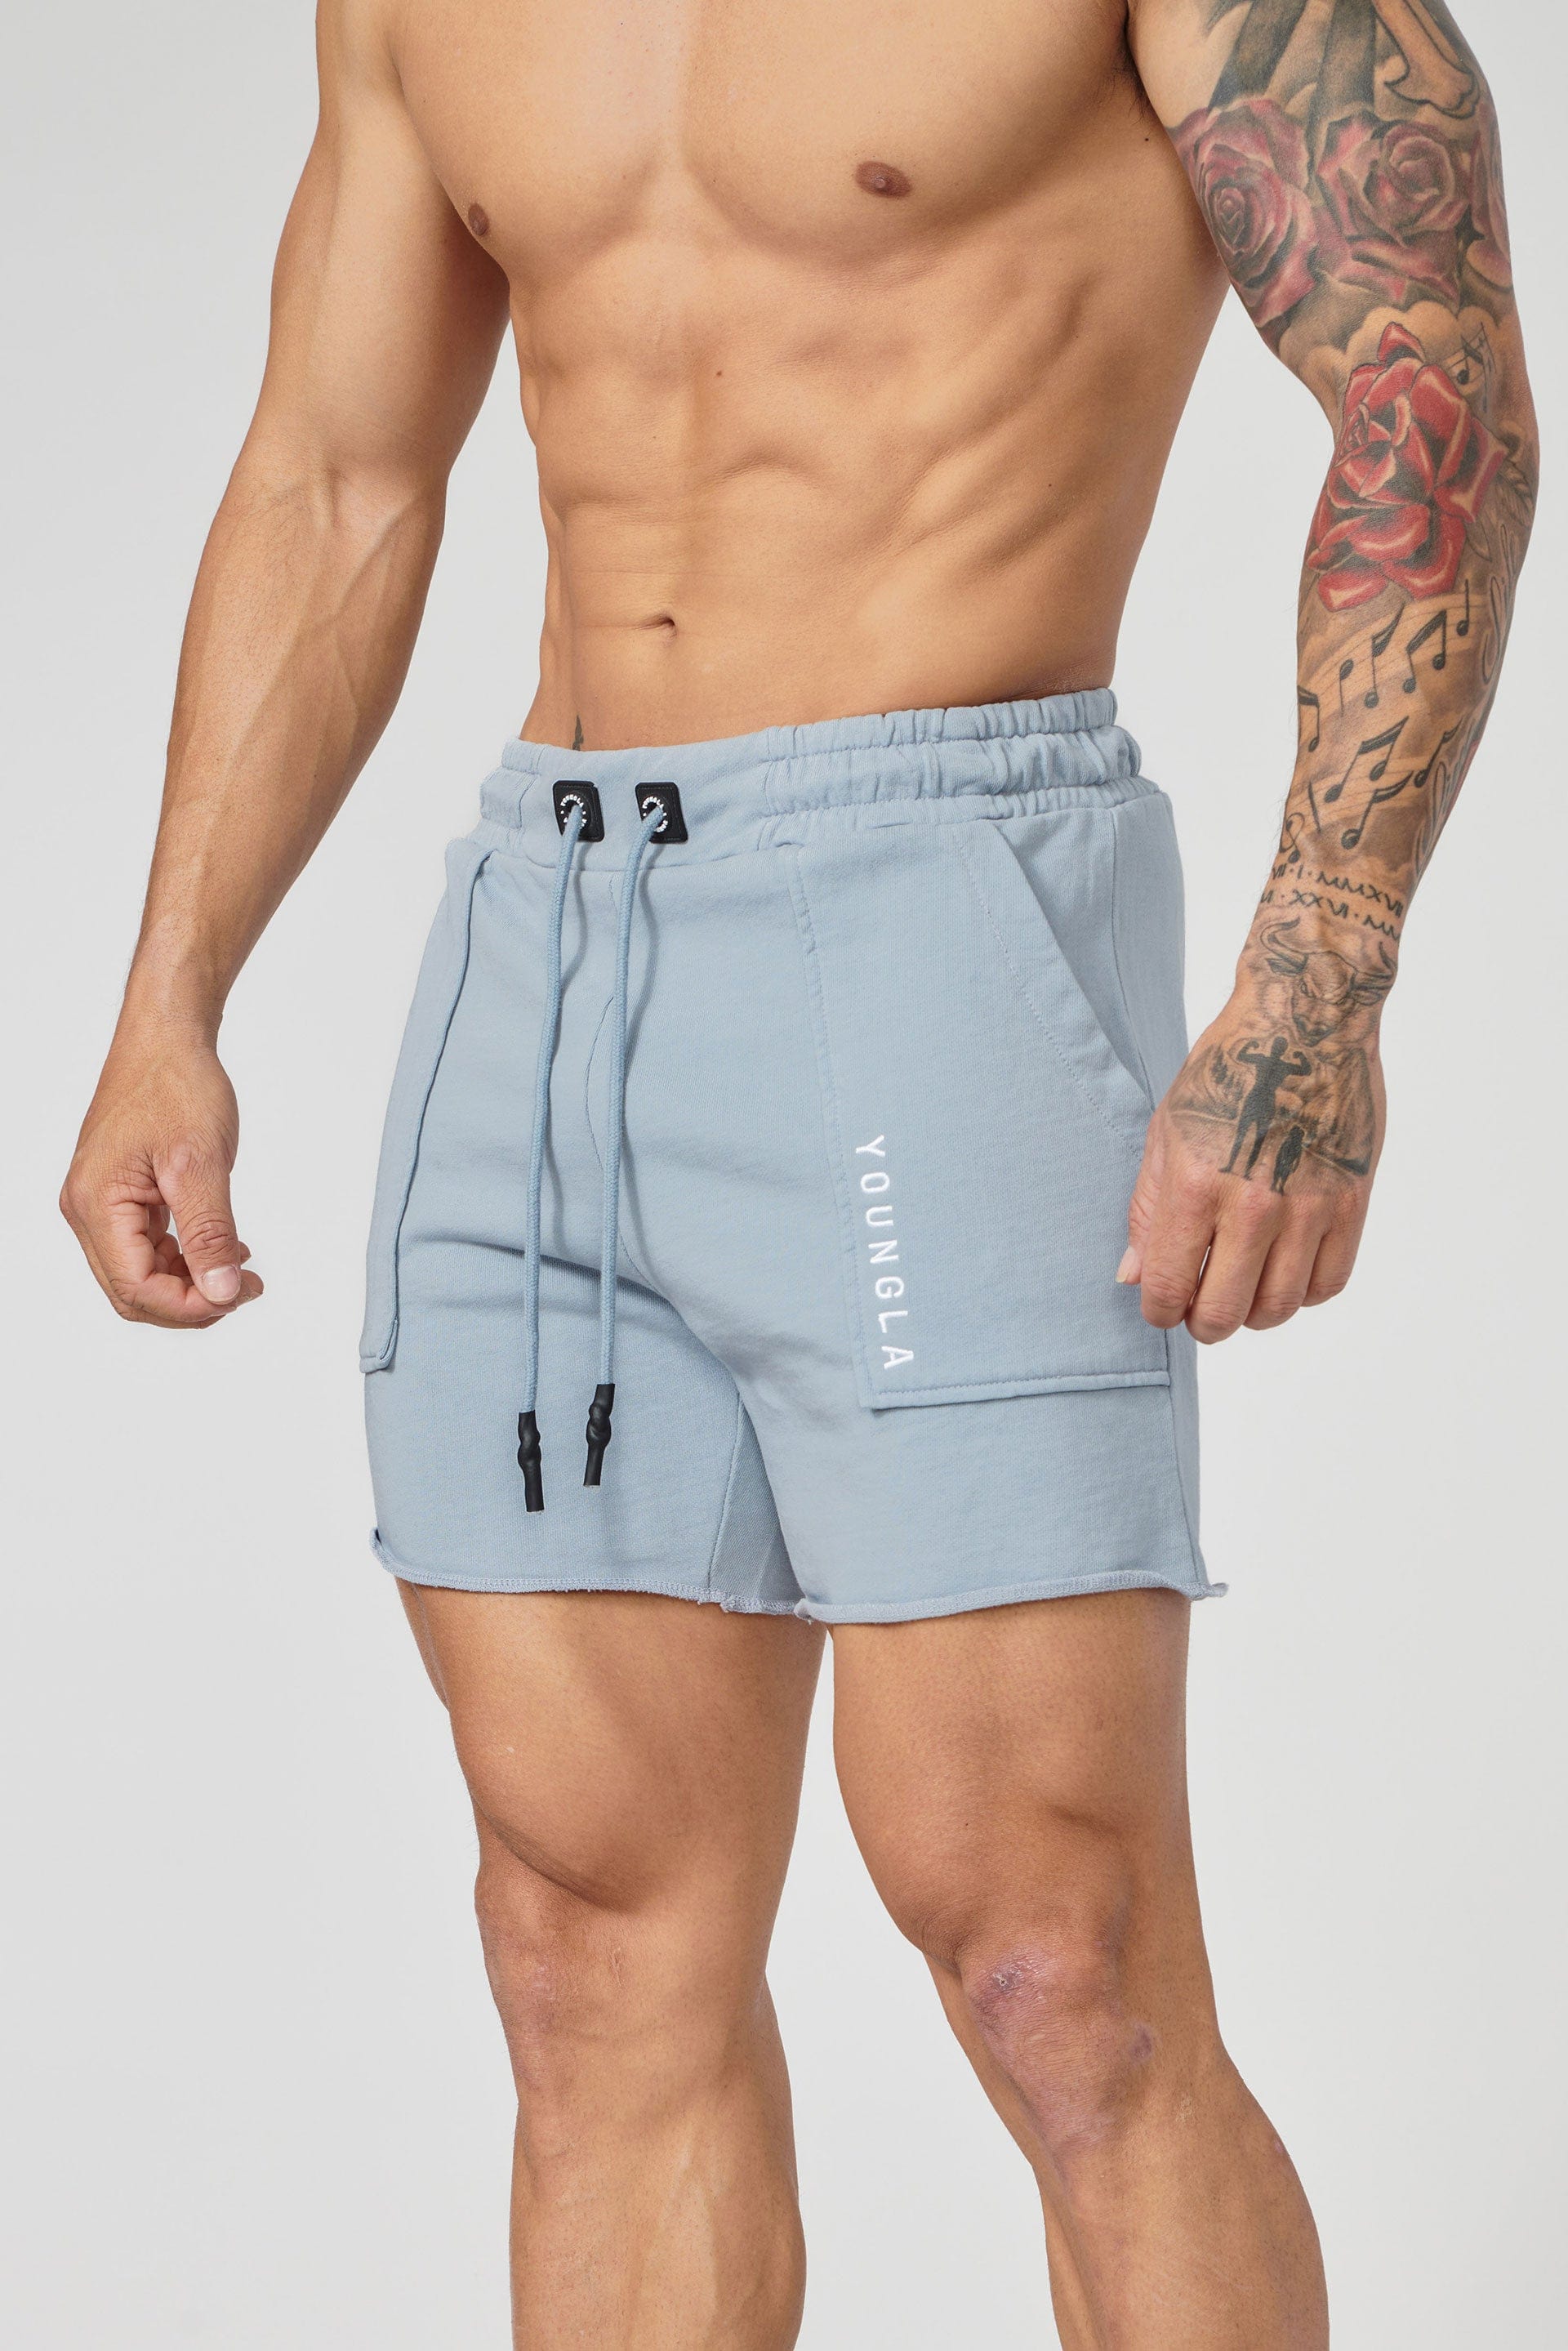 YoungLA on X: Dedication Short Shorts // made with 100% cotton